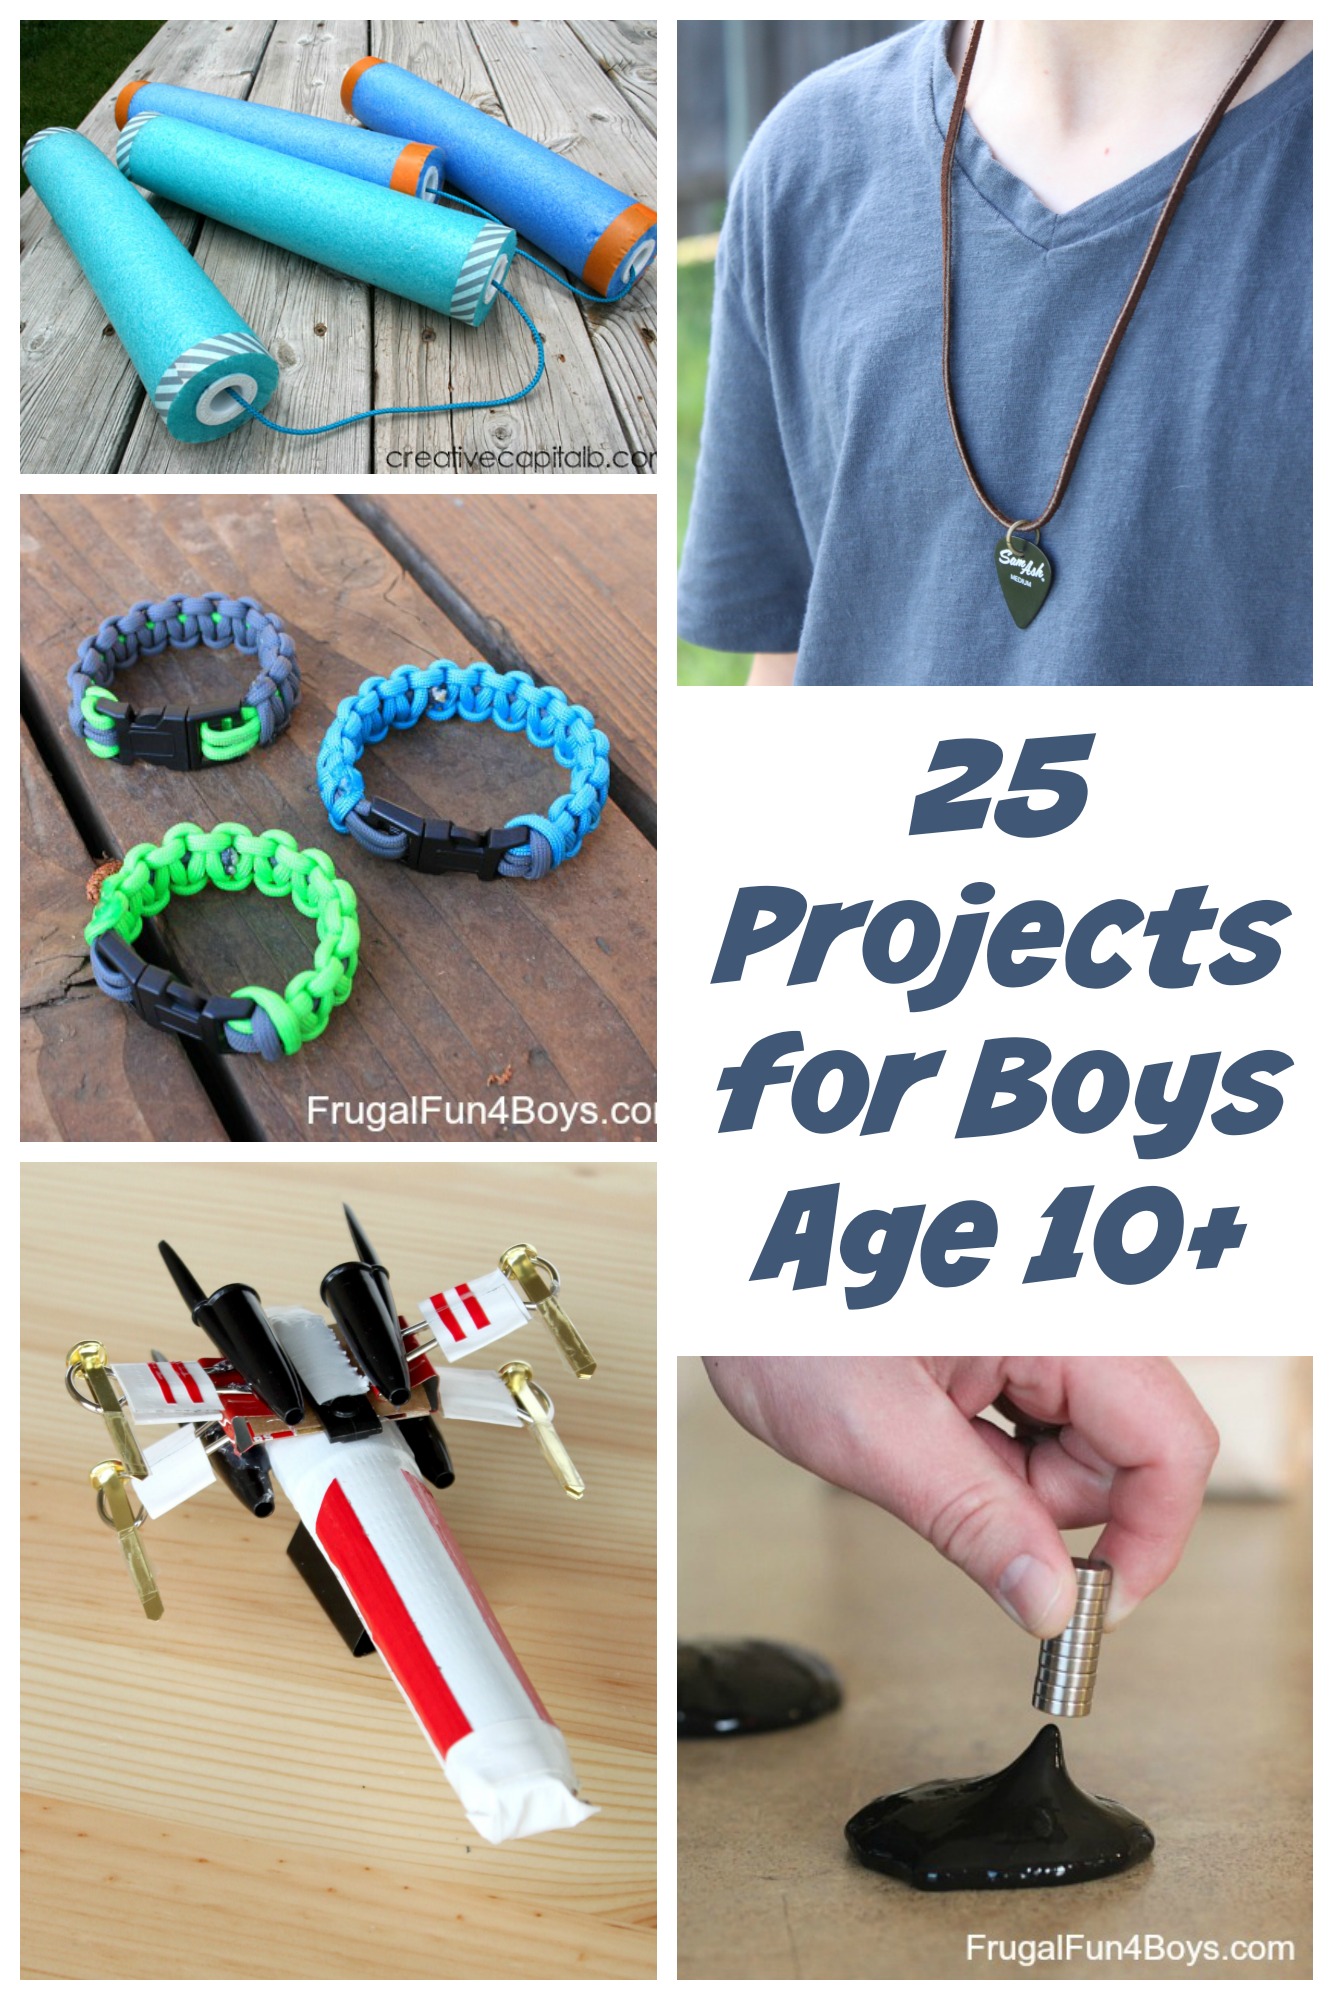 25 Awesome Projects for Tween and Teen Boys (Ages 10 and Up) - Frugal